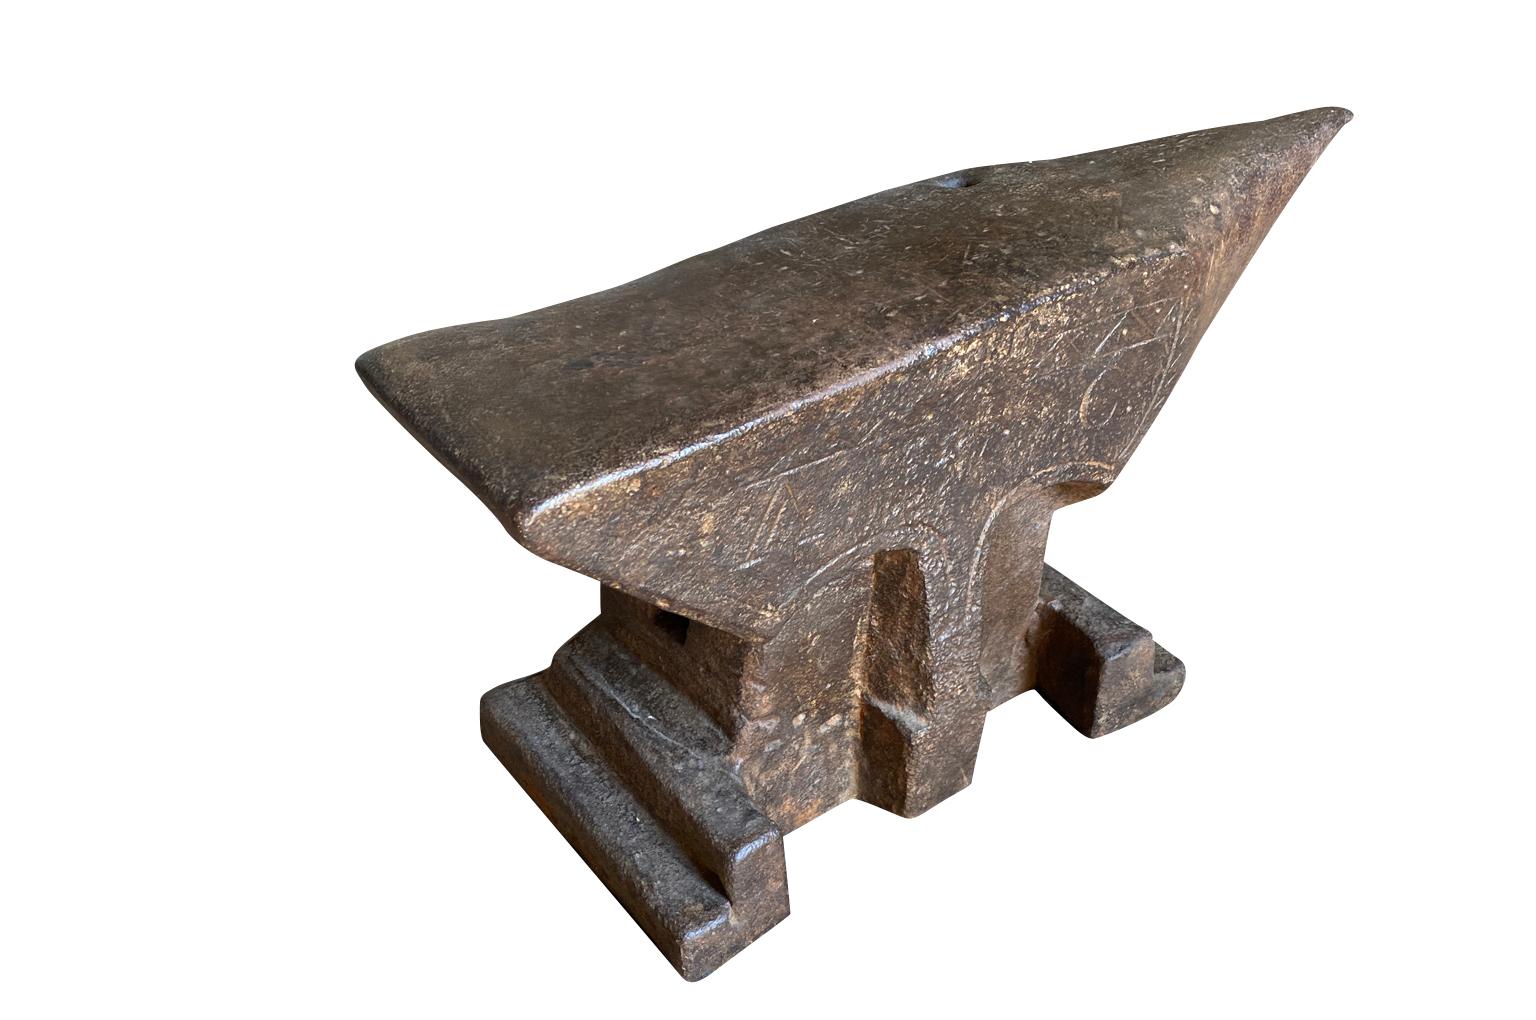 An outstanding mid-17th century Enclume - Anvil in beautiful iron. Sensational patina. A perfect art piece for any traditional or modern setting.